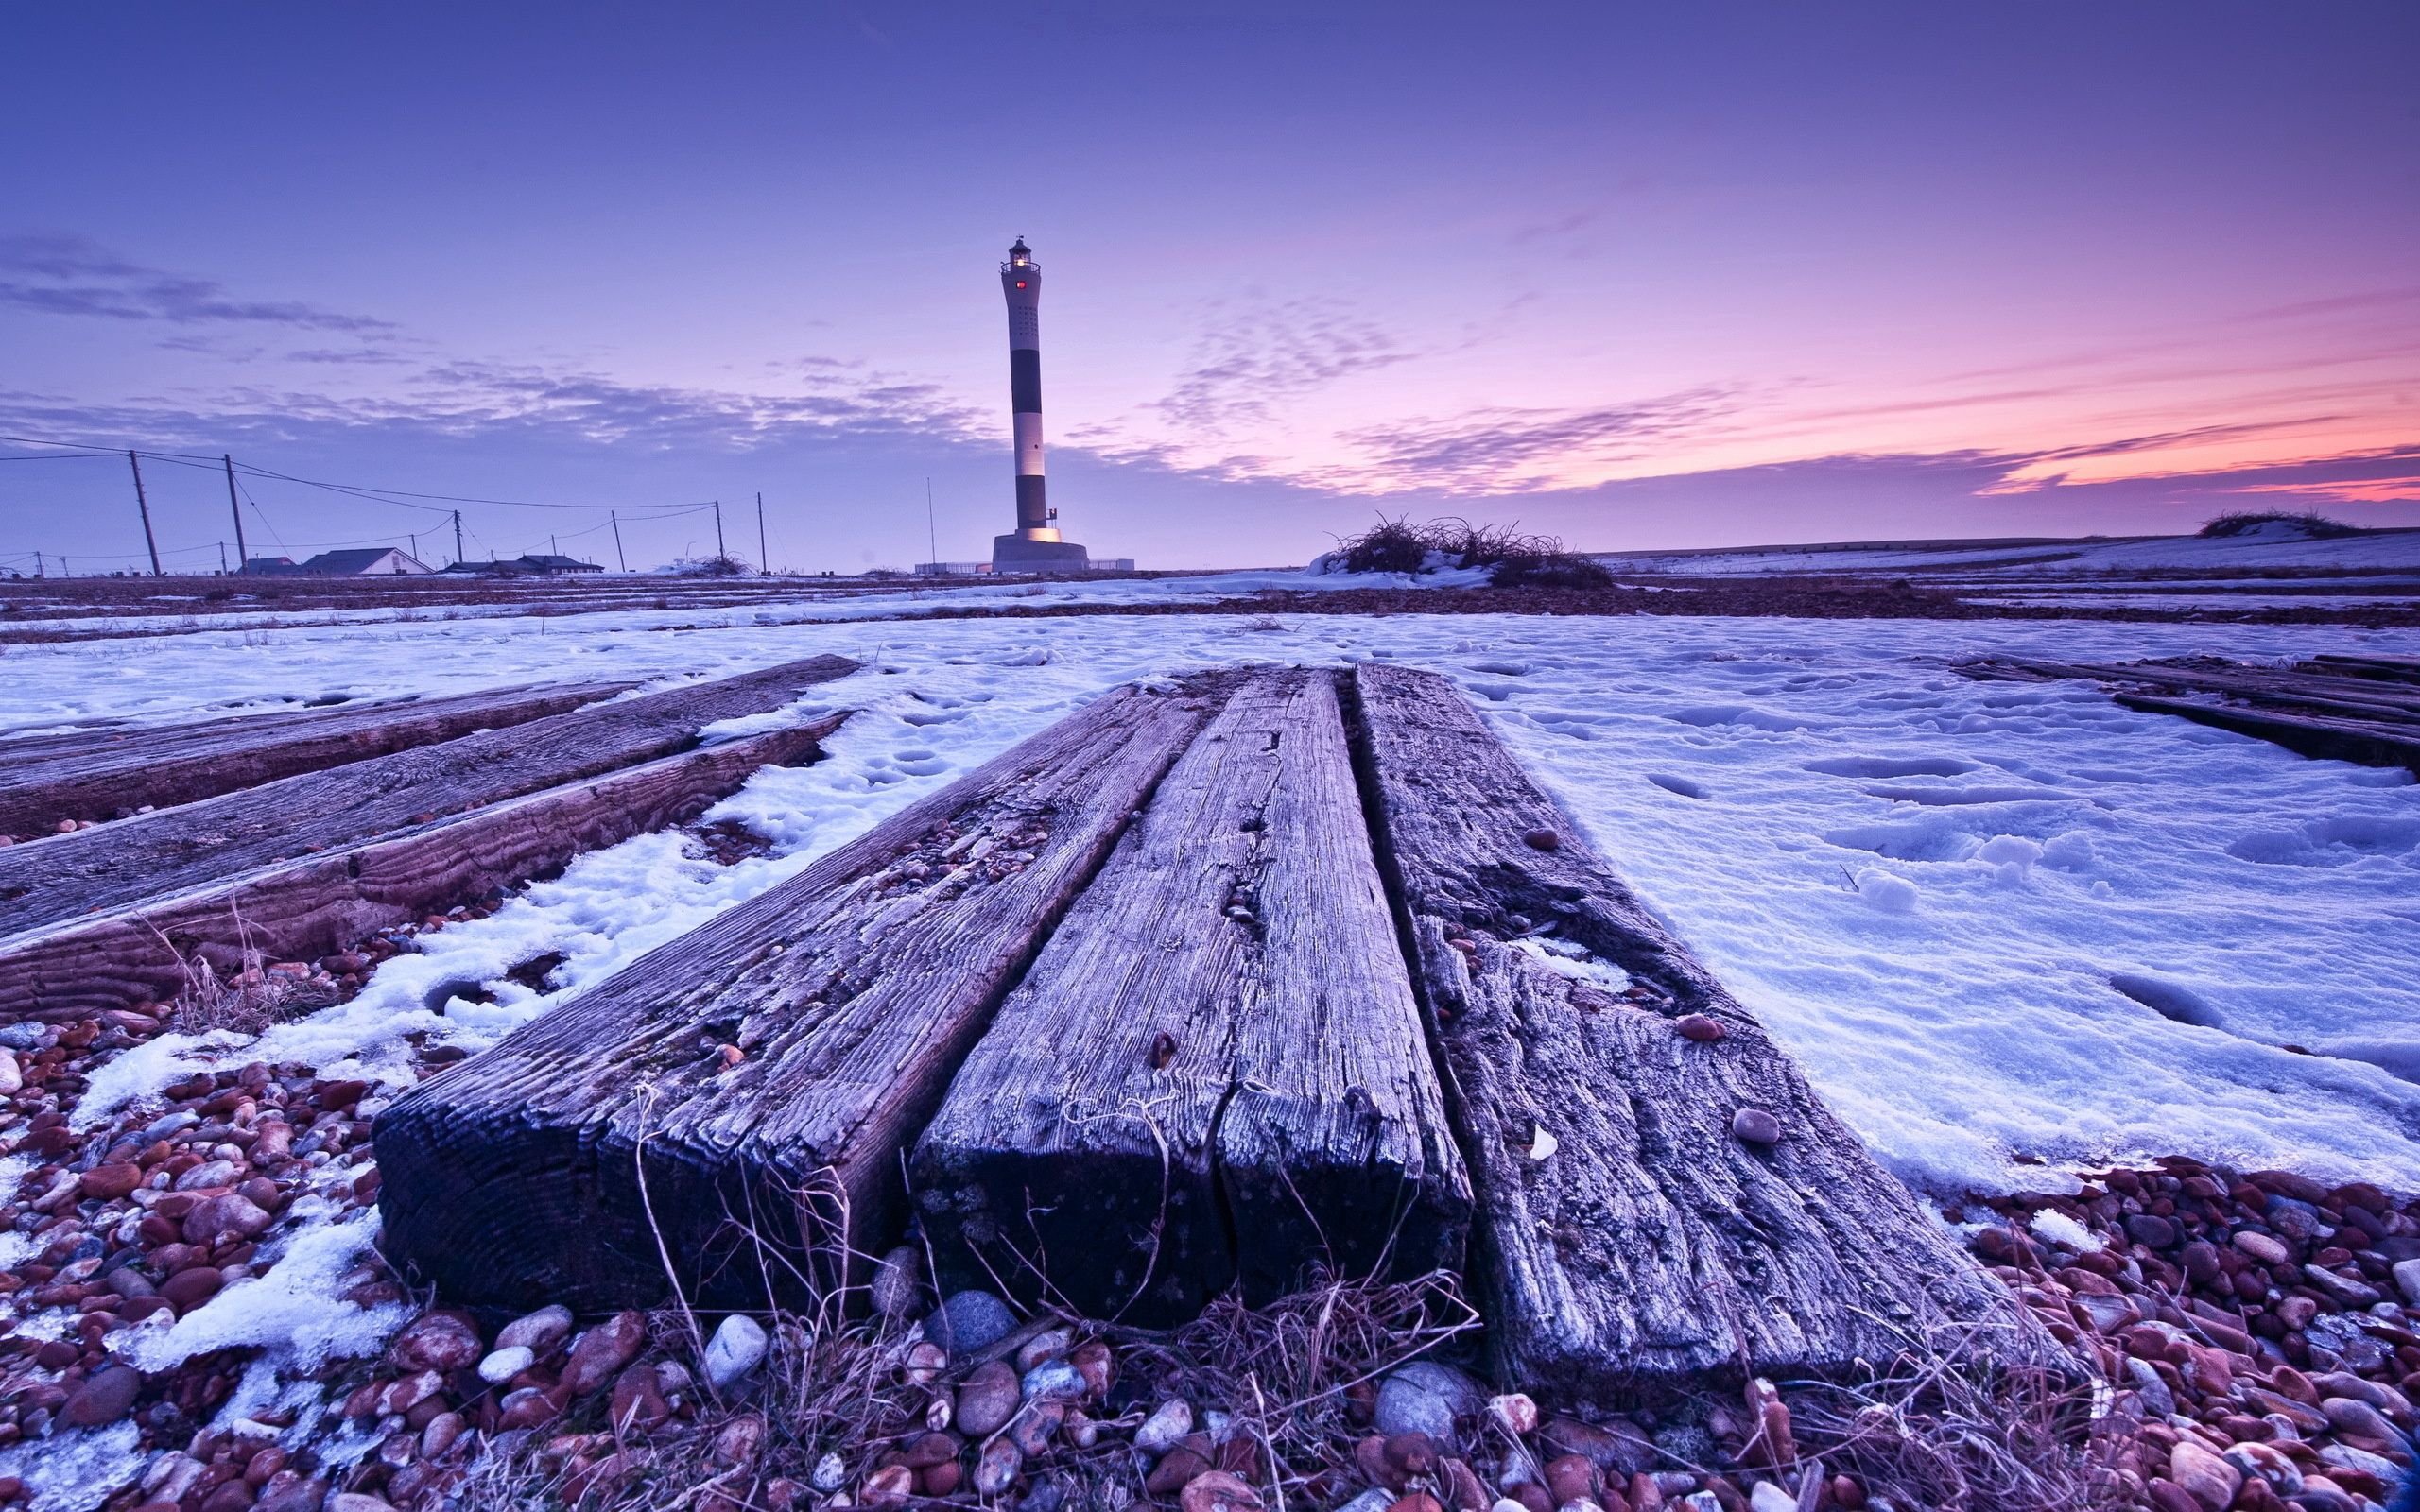 android stones, nature, grass, snow, withered, it's a sly, lighthouse, planks, board